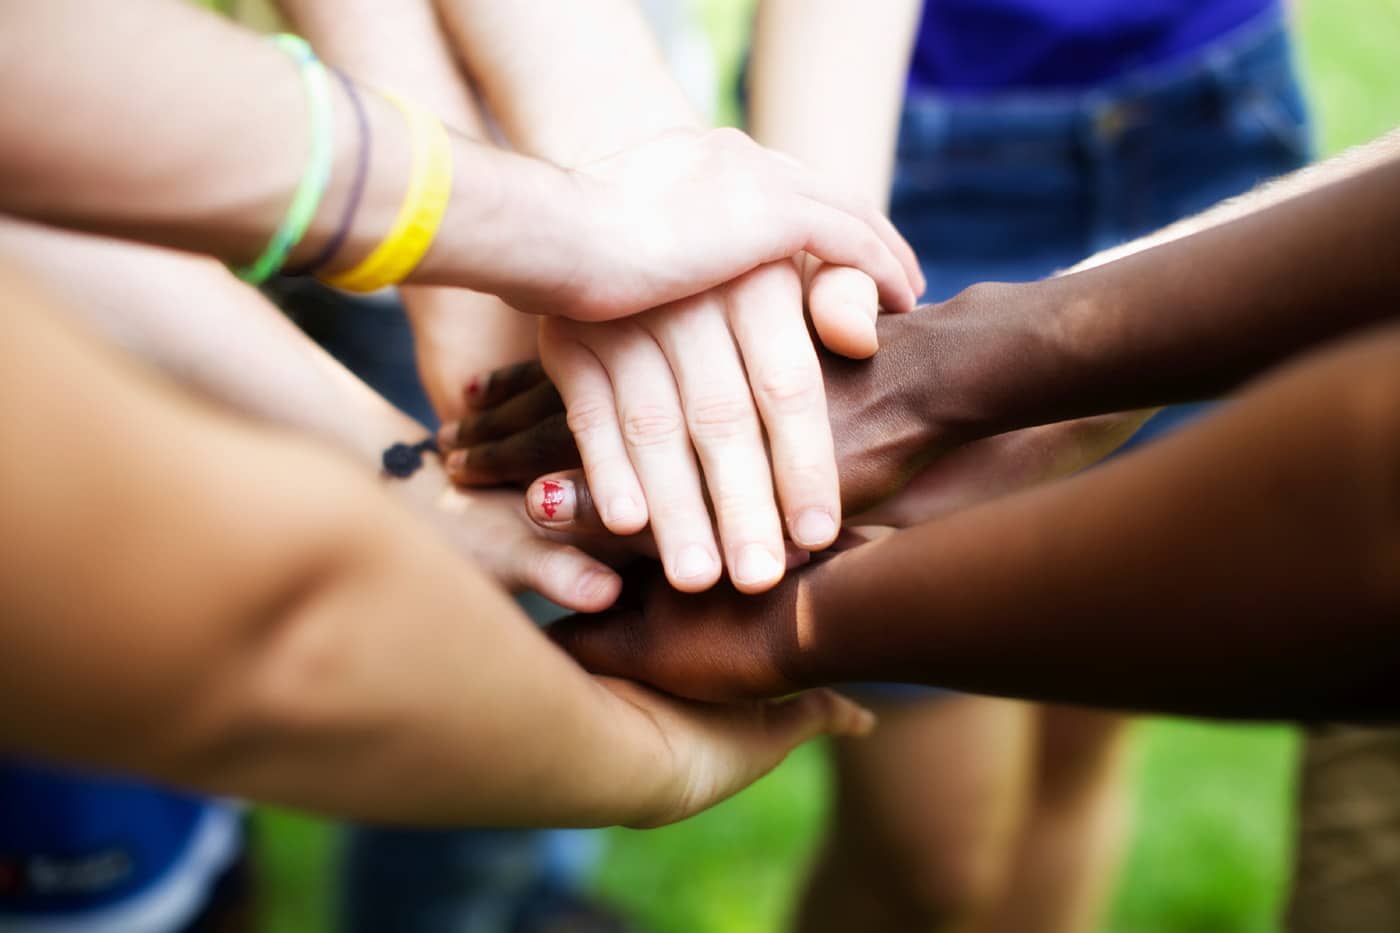 Stock image of people of different races putting their hands in together